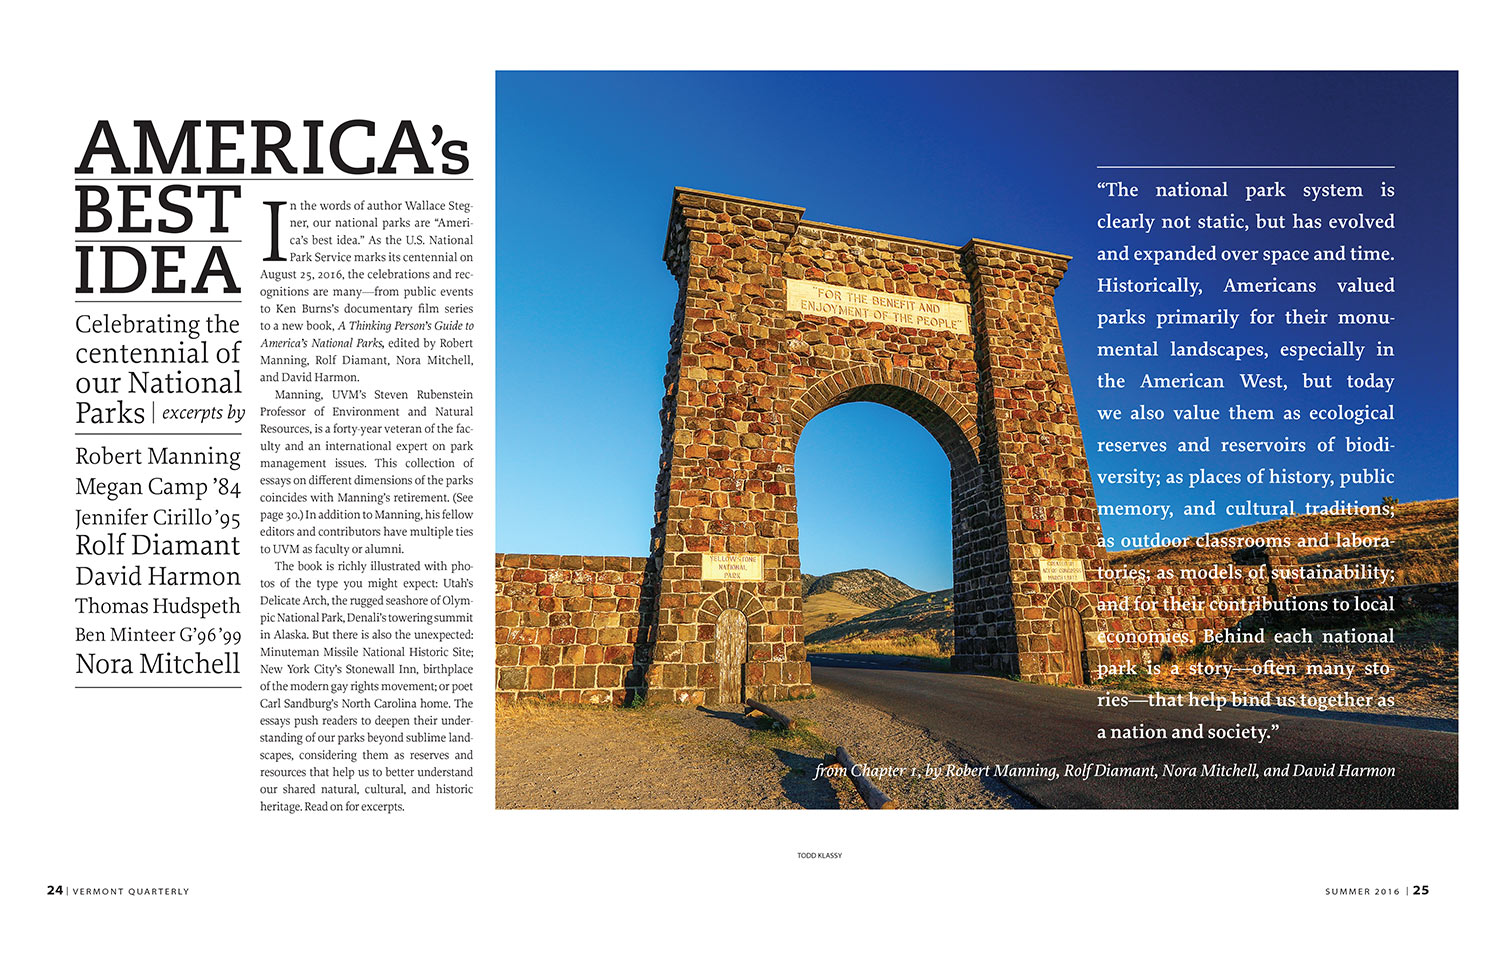 My photograph of the Roosevelt Arch at the entrance to Yellowstone National Park in Gardiner, Montana appears here in a two-page spread in this month's issue of Vermont Quarterly.